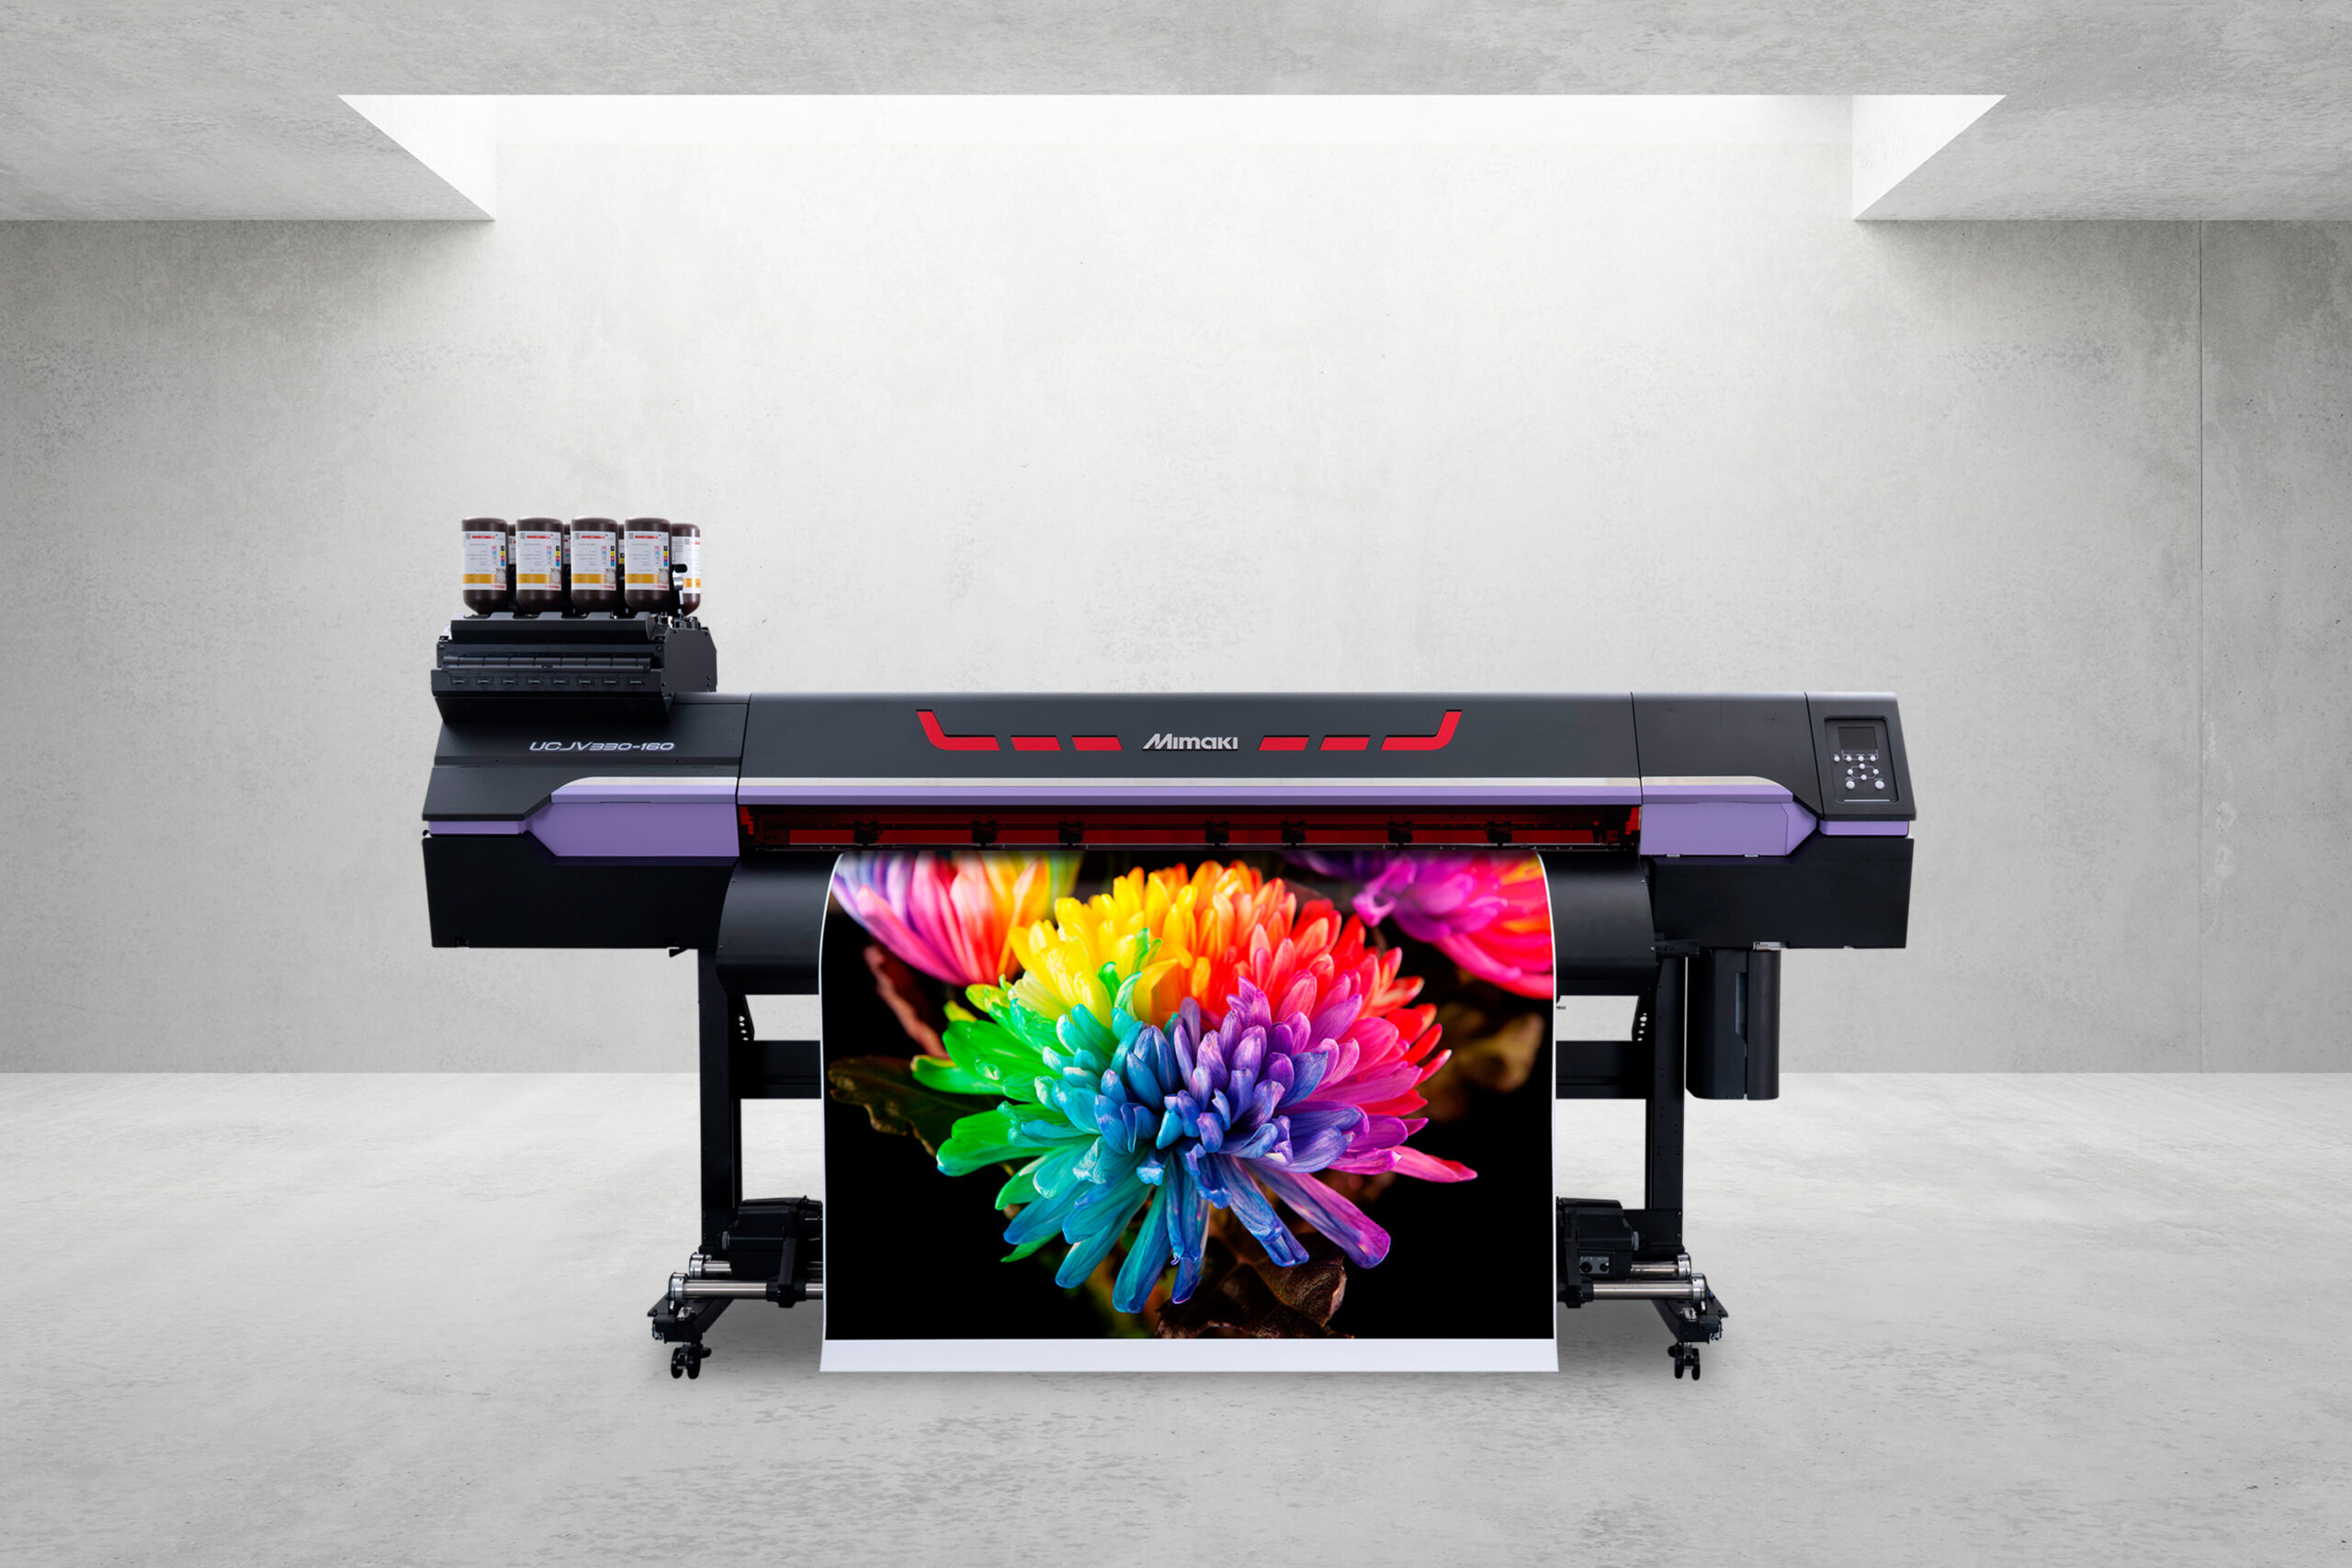 Mimaki UCJV330-160 LED UV printer/cutter with a brightly coloured print, shown against a grey background